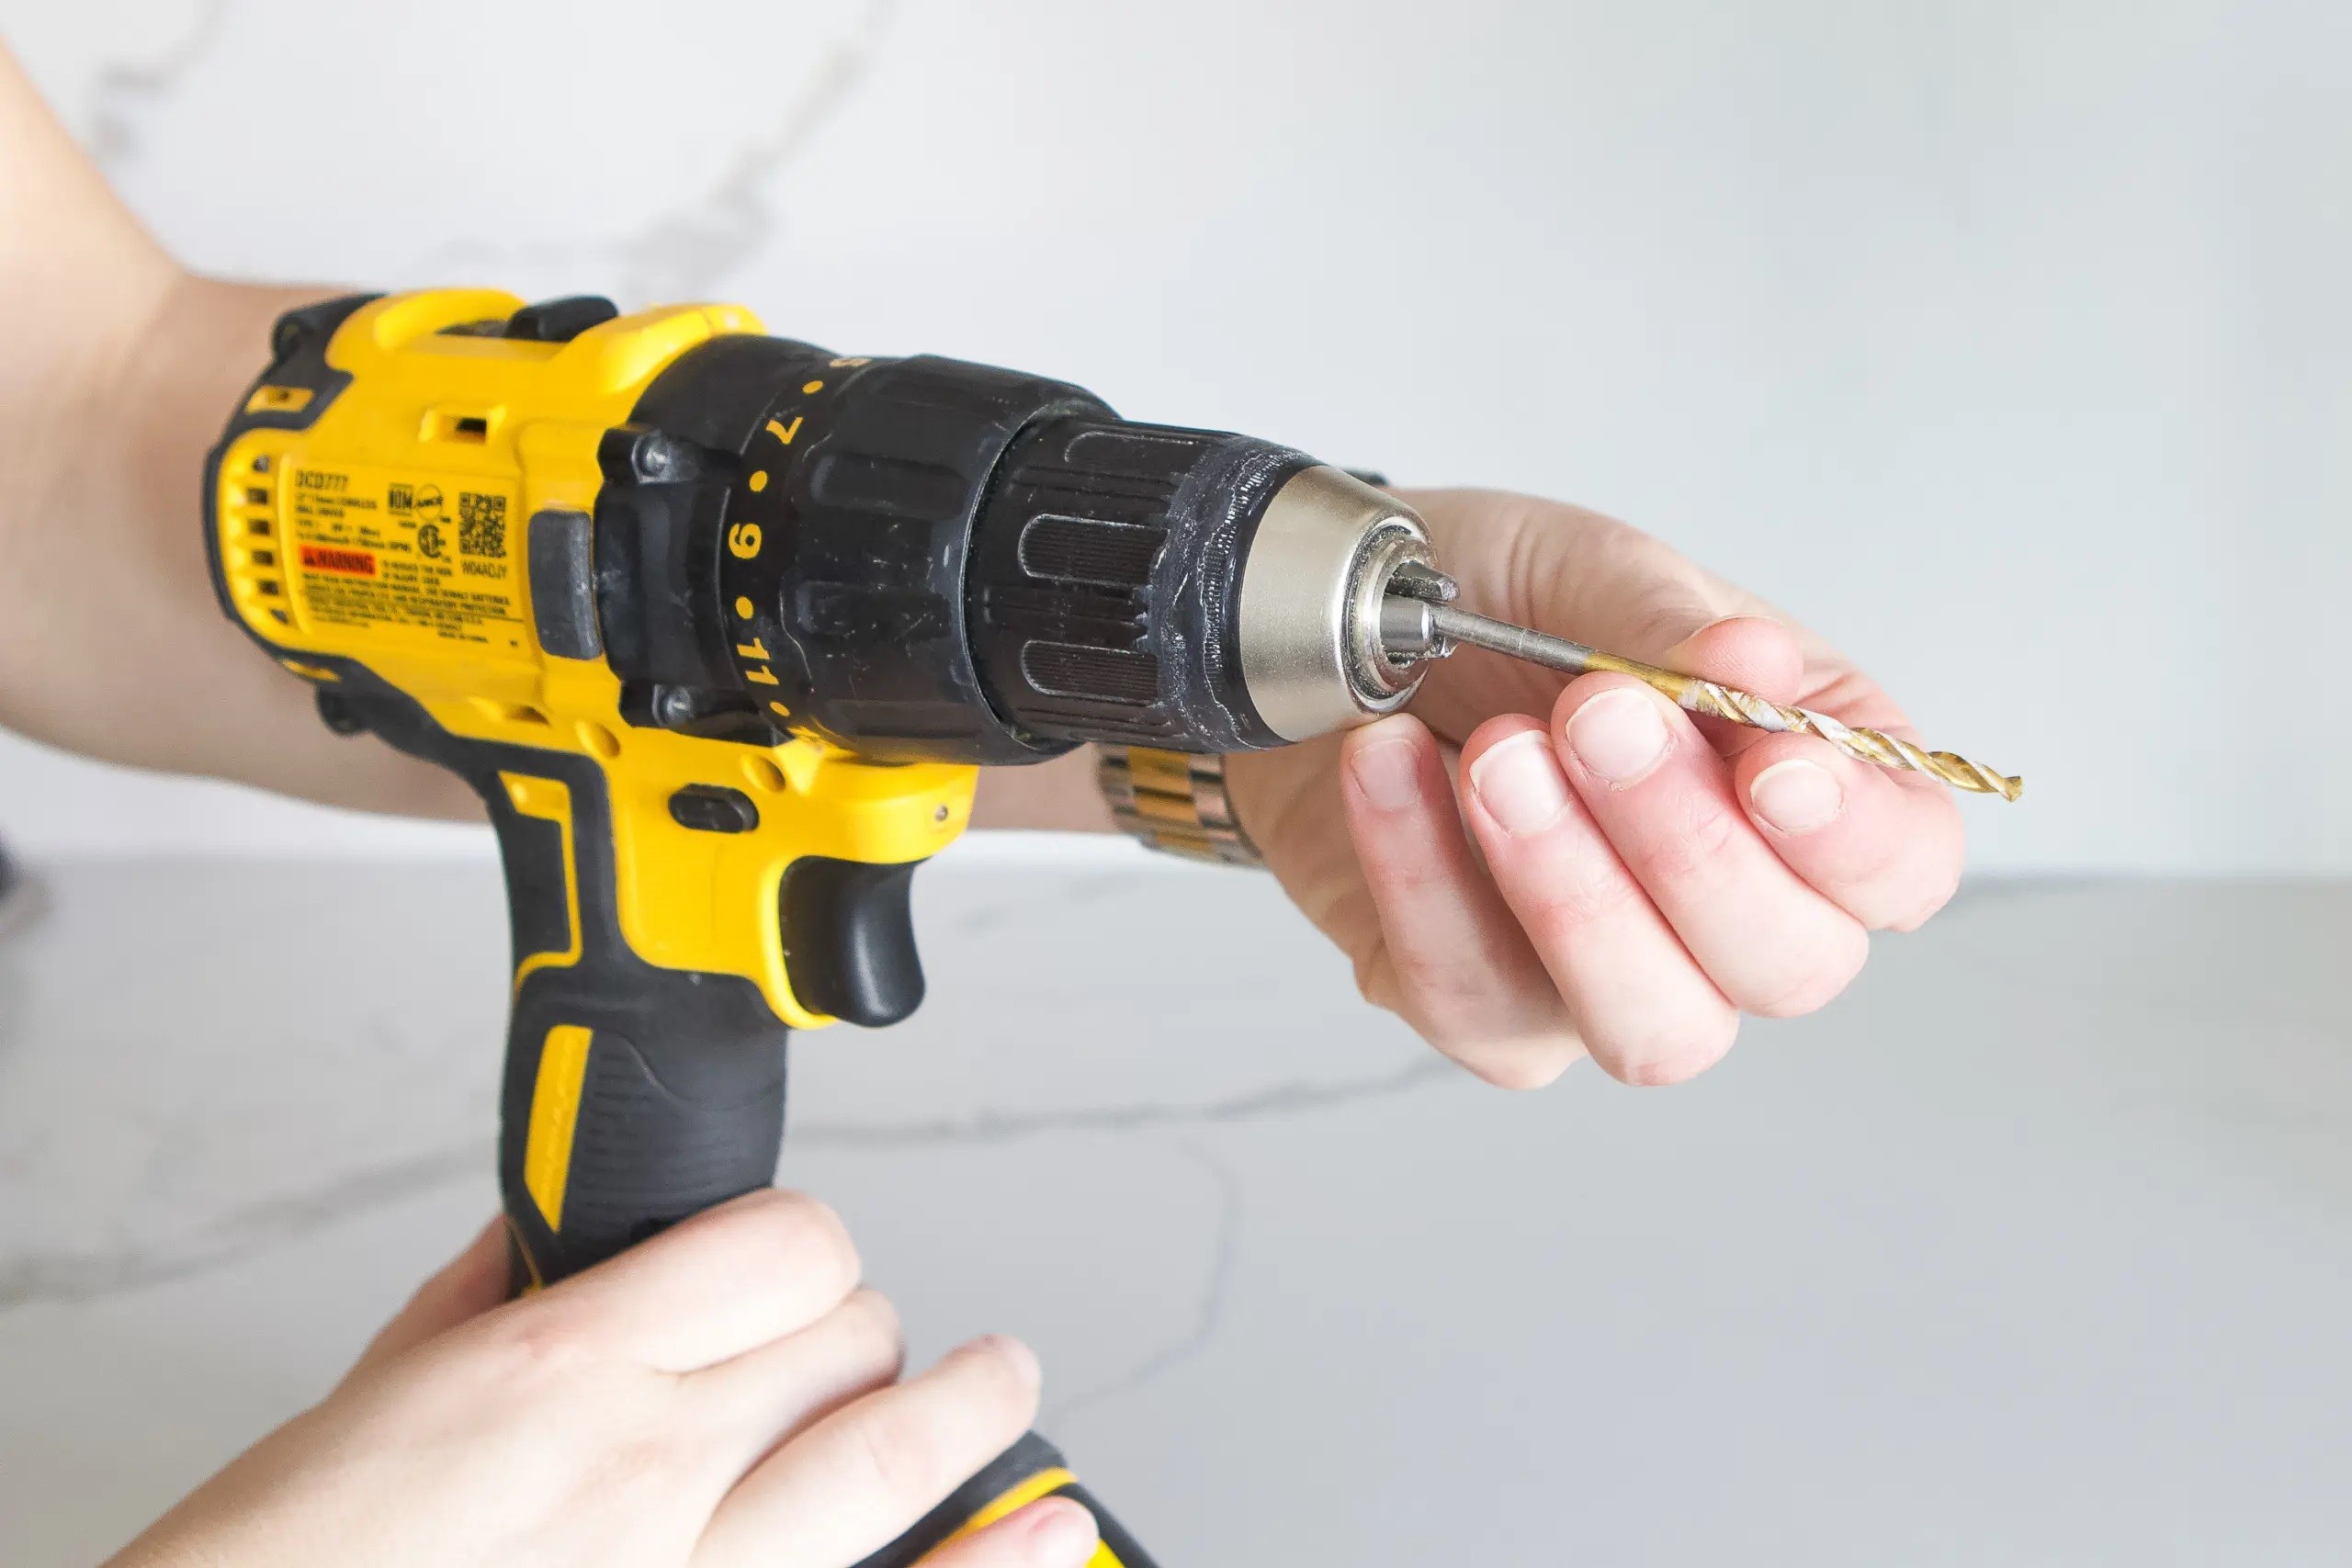 Things to Remember to Use a Cordless Drill